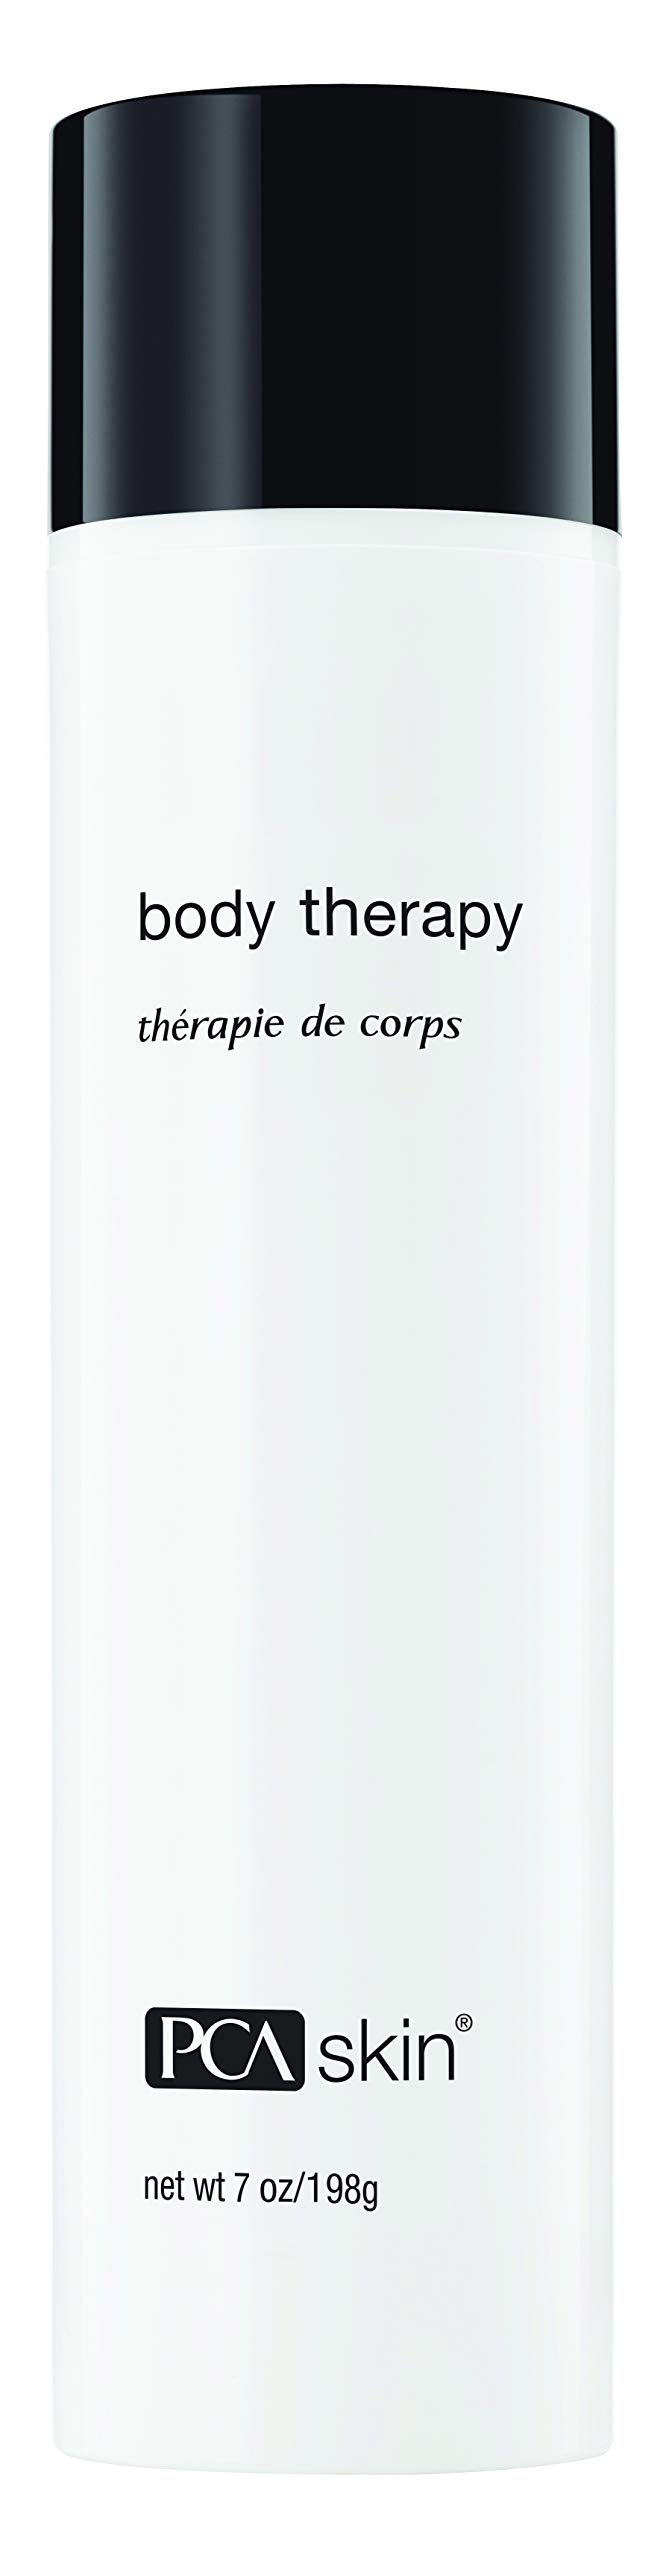 PCA SKIN Daily Body Therapy Lotion - Rich 12% Lactic Acid Moisturizing Cream to Nourish Dry Skin, Fragrance-Free, Non-Greasy Formula (7 oz)